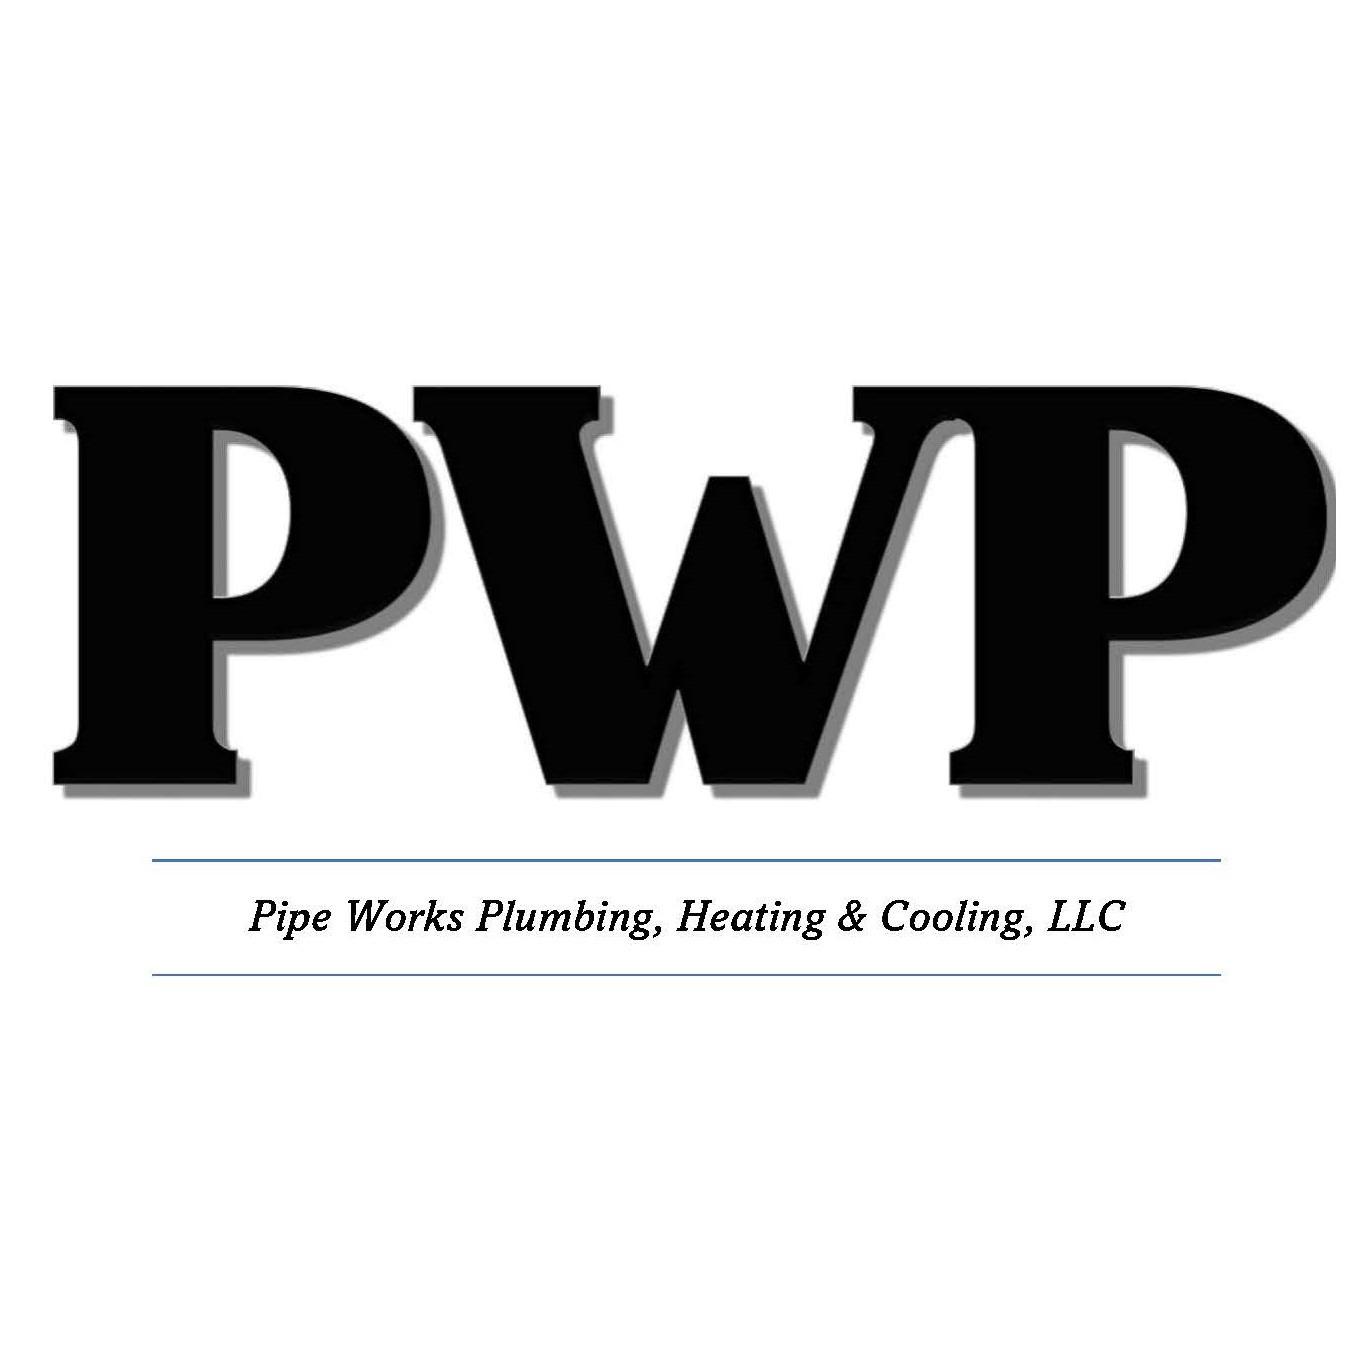 Pipe Works Plumbing, Heating and Cooling, LLC